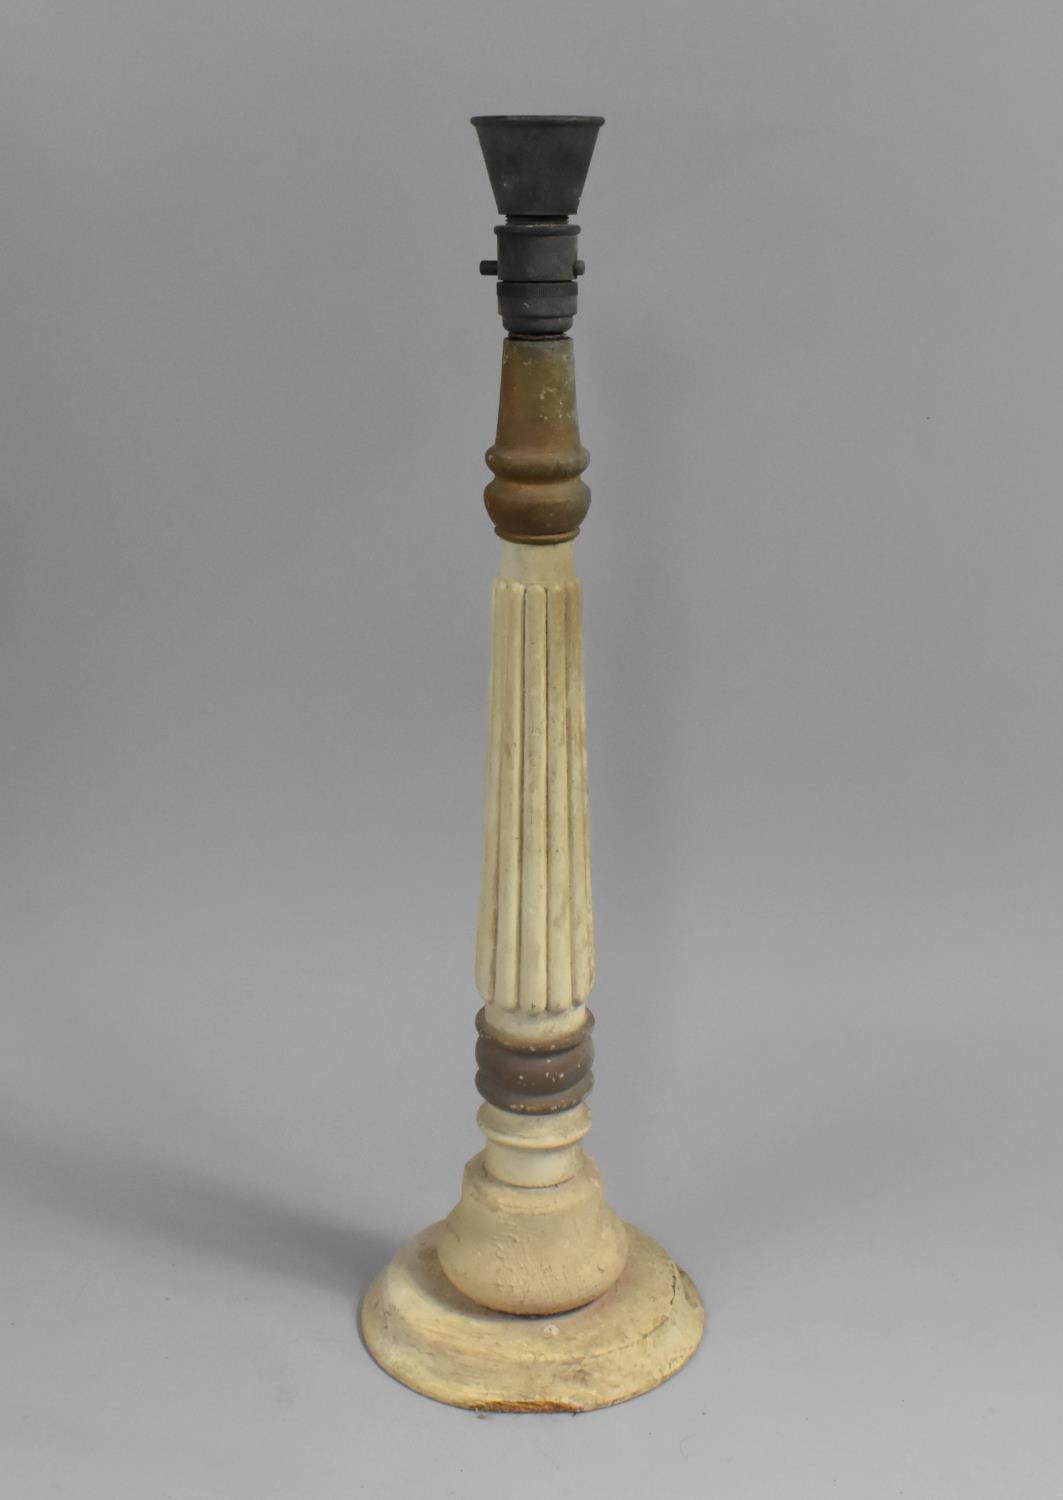 A Wooden Table Lamp of Turned Tapering and Reeded For, in Need of New Bulb Fitting, 60cm high